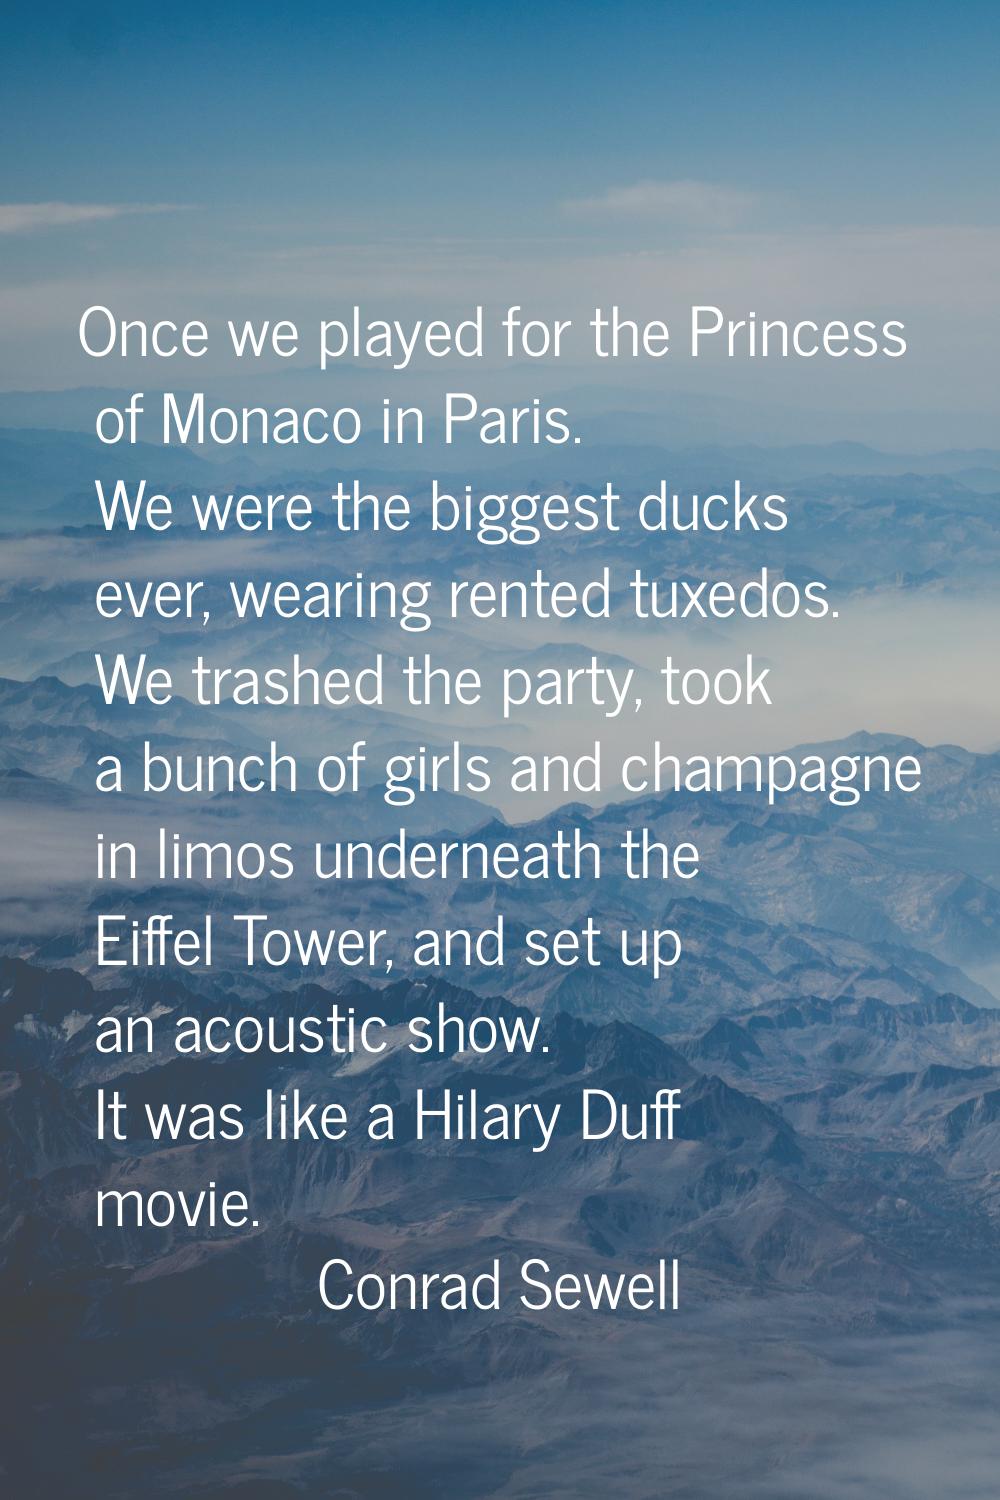 Once we played for the Princess of Monaco in Paris. We were the biggest ducks ever, wearing rented 